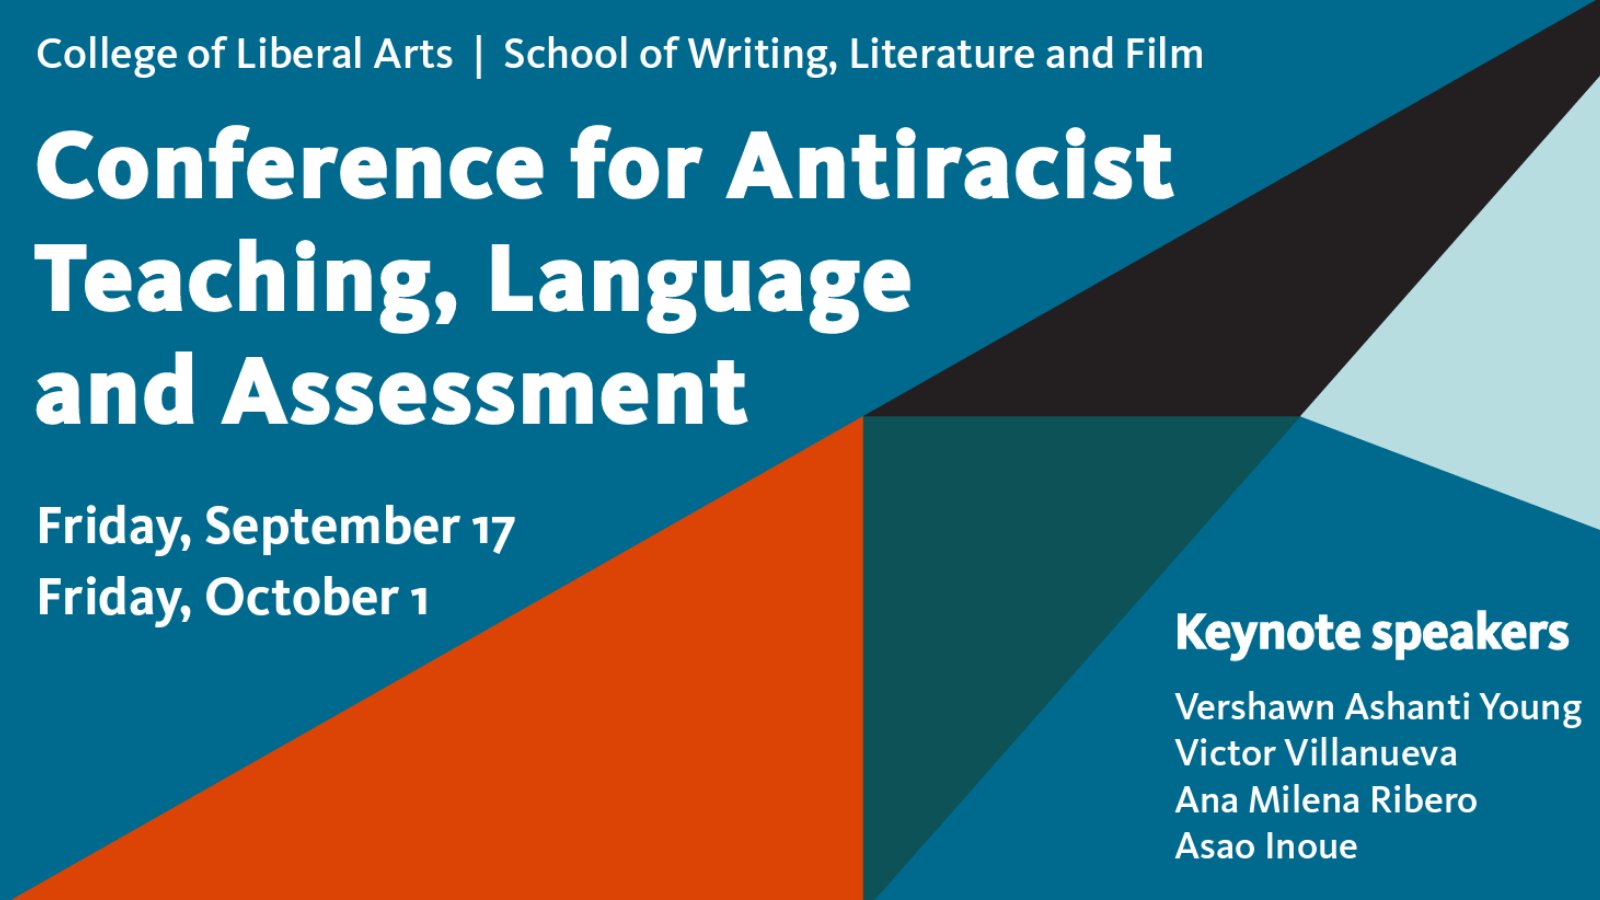 Black, orange, green, and light blue triangles on blue background with "Conference for Antiracist Teaching, Language, and Assessment" in light blue font.